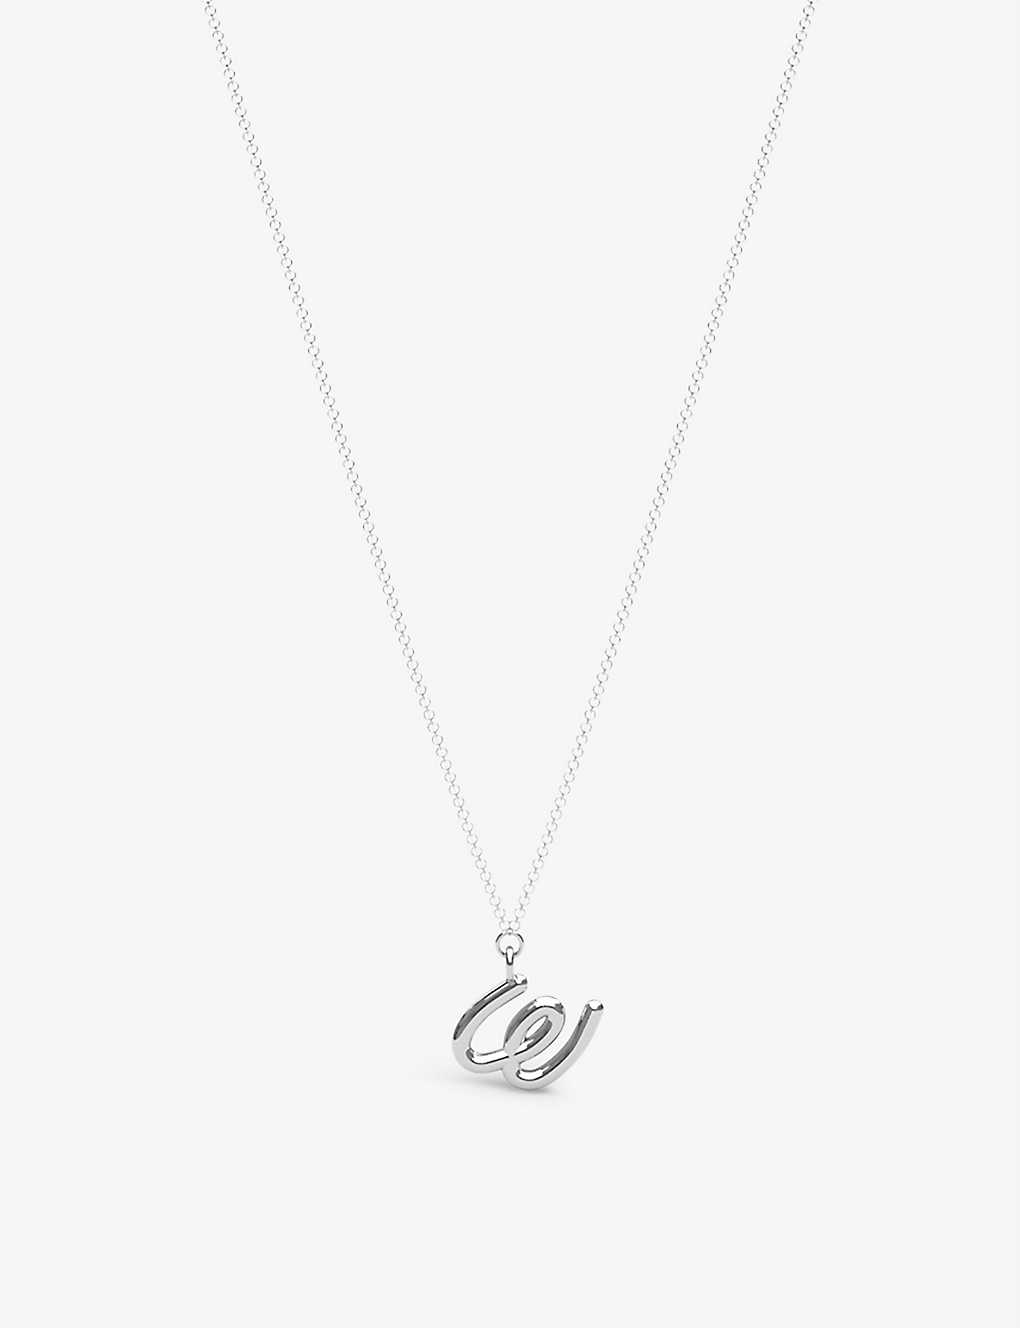 The Alkemistry Womens 18ct White Gold Love Letter W Initial 18ct White-gold Pendant Necklace